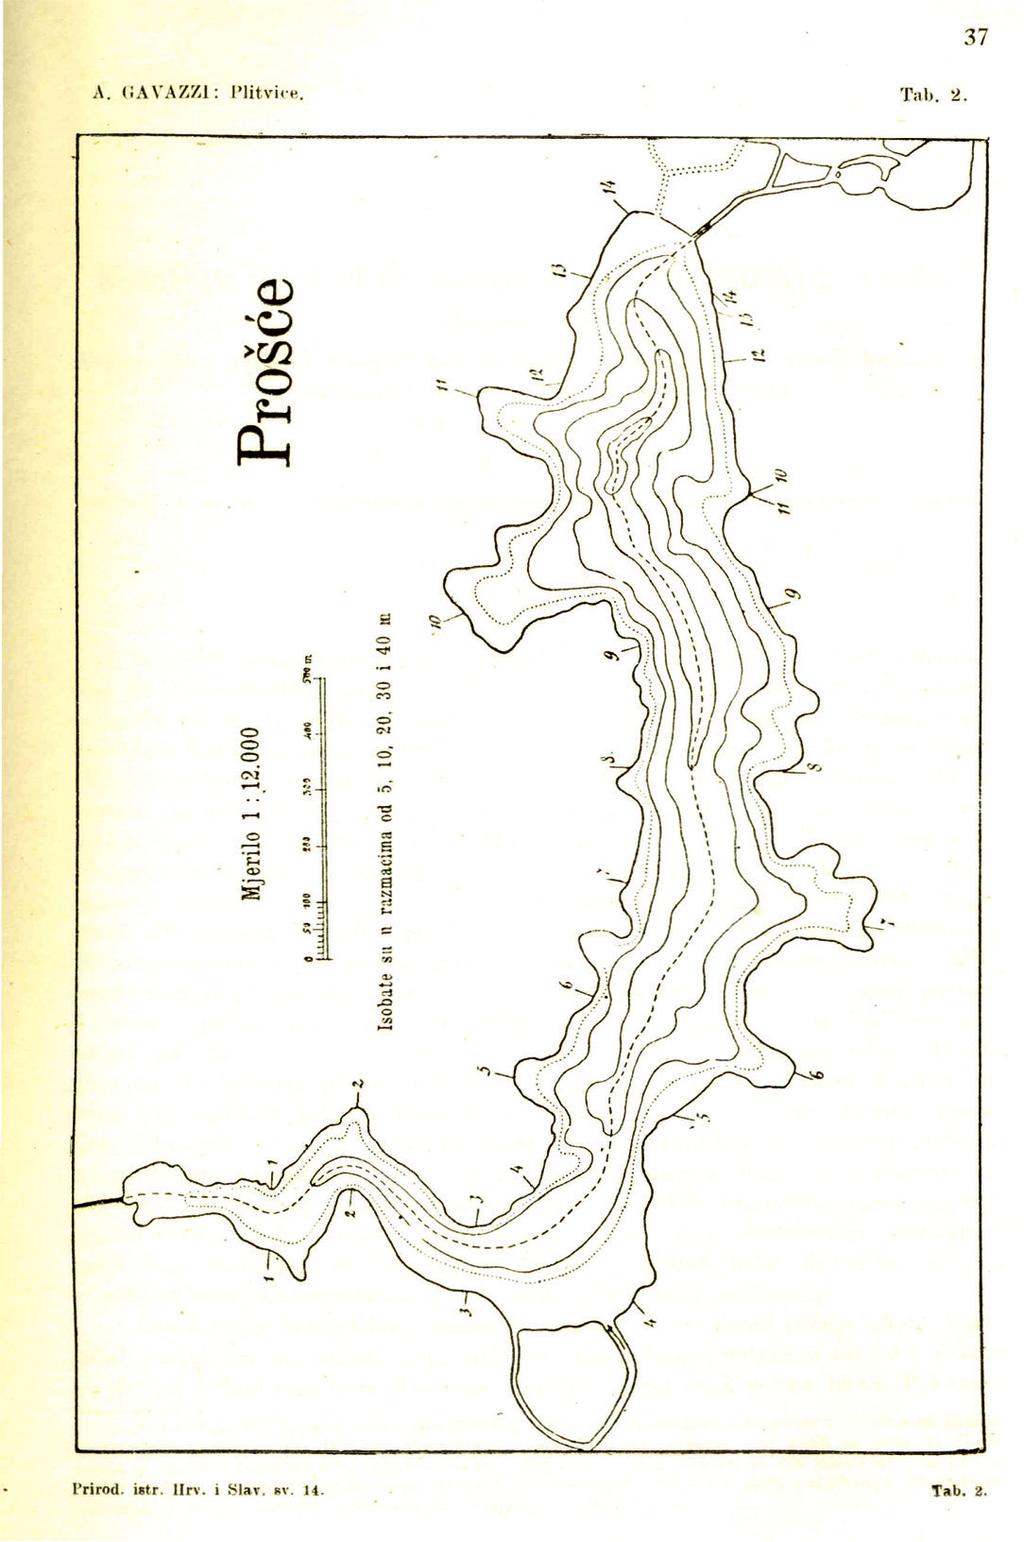 GEOFIZIKA, VOL. 35, NO. 2, 2018, 189 278 197 Figure 2. Bathymetry of the Lake 1 (left) and the Lake 12 (right) as given by Gavazzi (1919). altitudes in Tab.